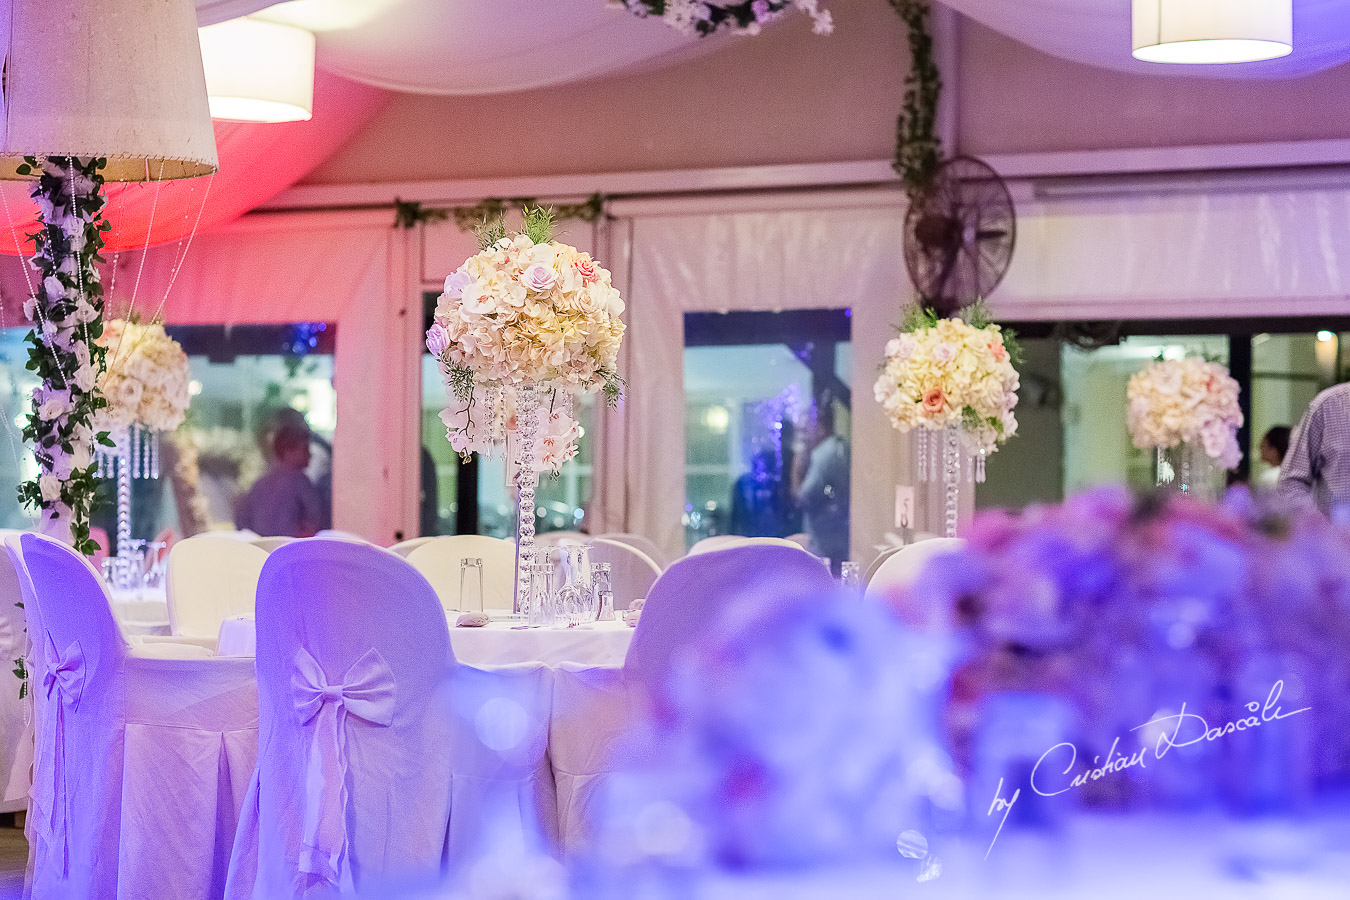 Venue details photographed at a wedding in Nicosia by Cyprus Wedding Photographer Cristian Dascalu